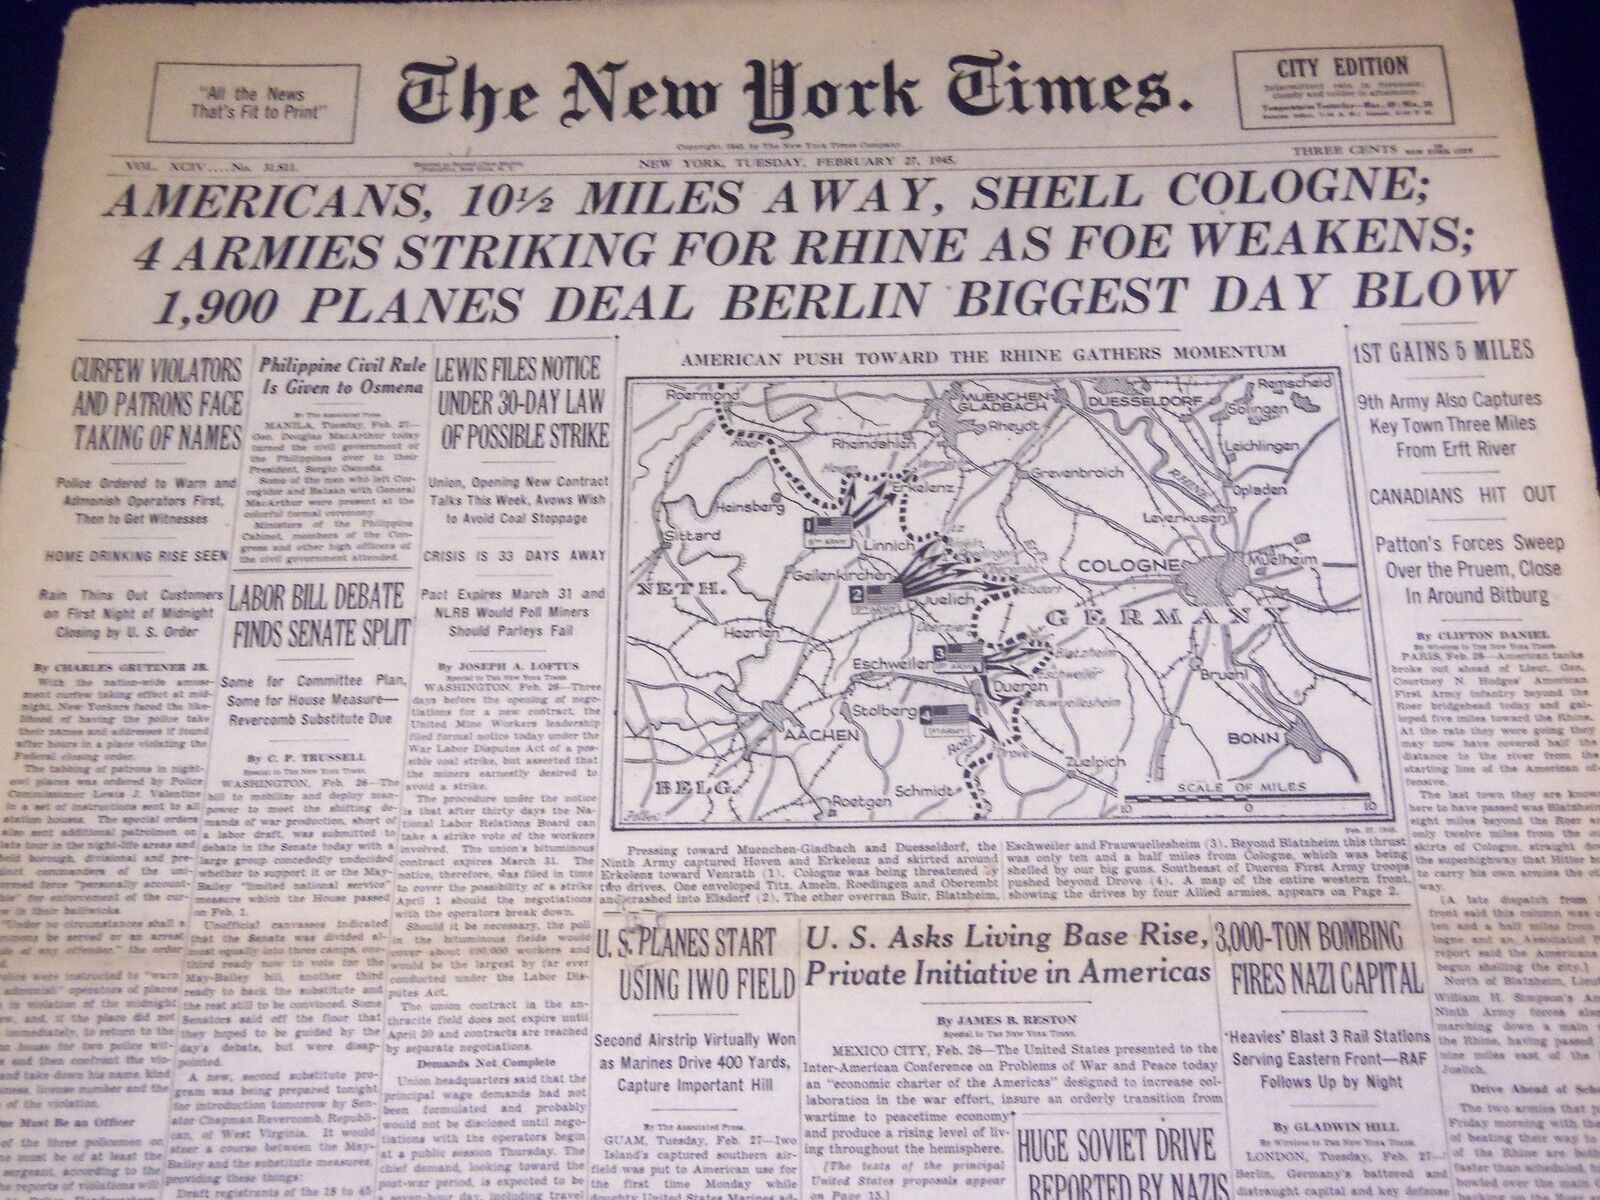 1945 FEB 27 NEW YORK TIMES - AMERICANS 10.5 MILES AWAY, SHELL COLOGNE - NT 565